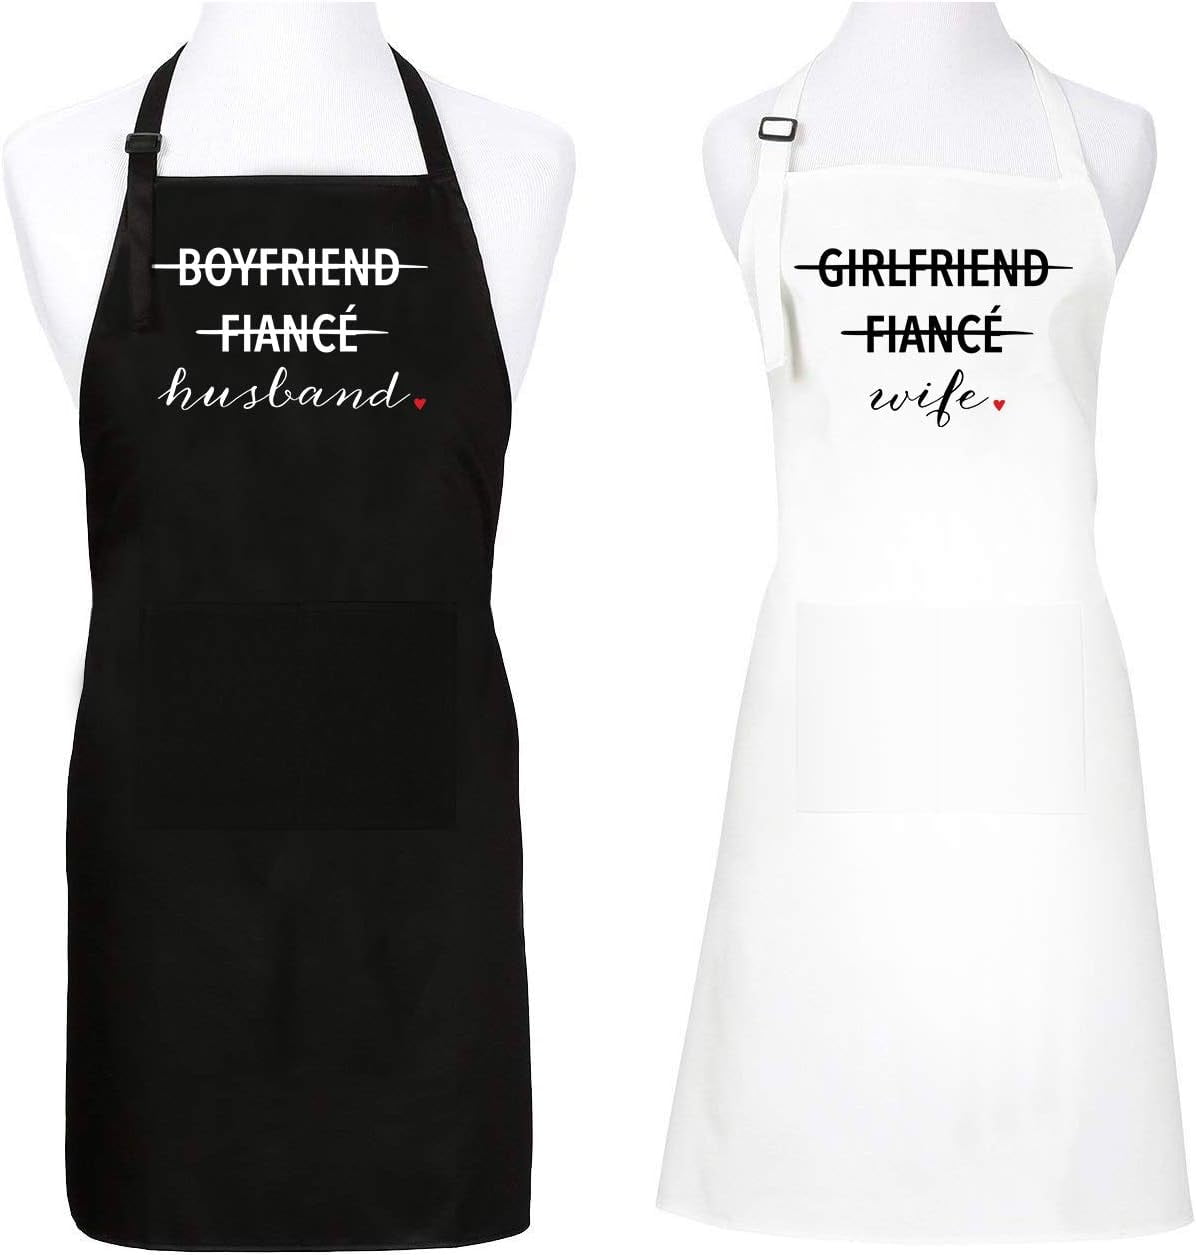 King & Queen Apron Set - Christmas Gifts for Husband Wife, Funny Kitchen  Gifts for Couples, Anniversary Wedding Gifts for Him Her, Valentines Day